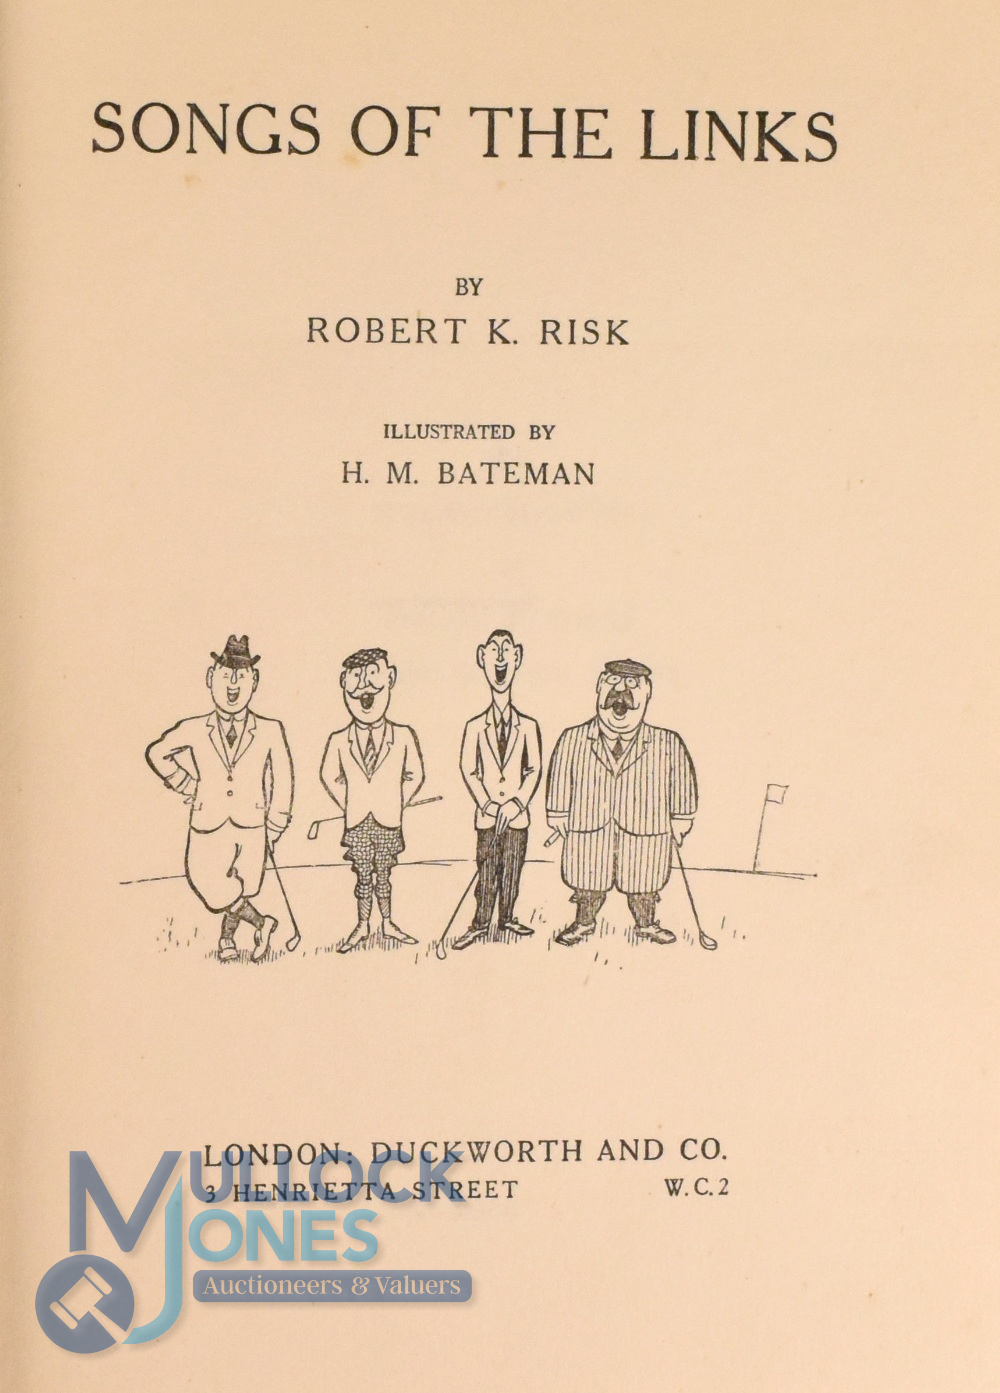 Risk, Robert K - "Songs of The Links" 1st ed 1919 - original green cloth boards with Illustrations - Image 2 of 2